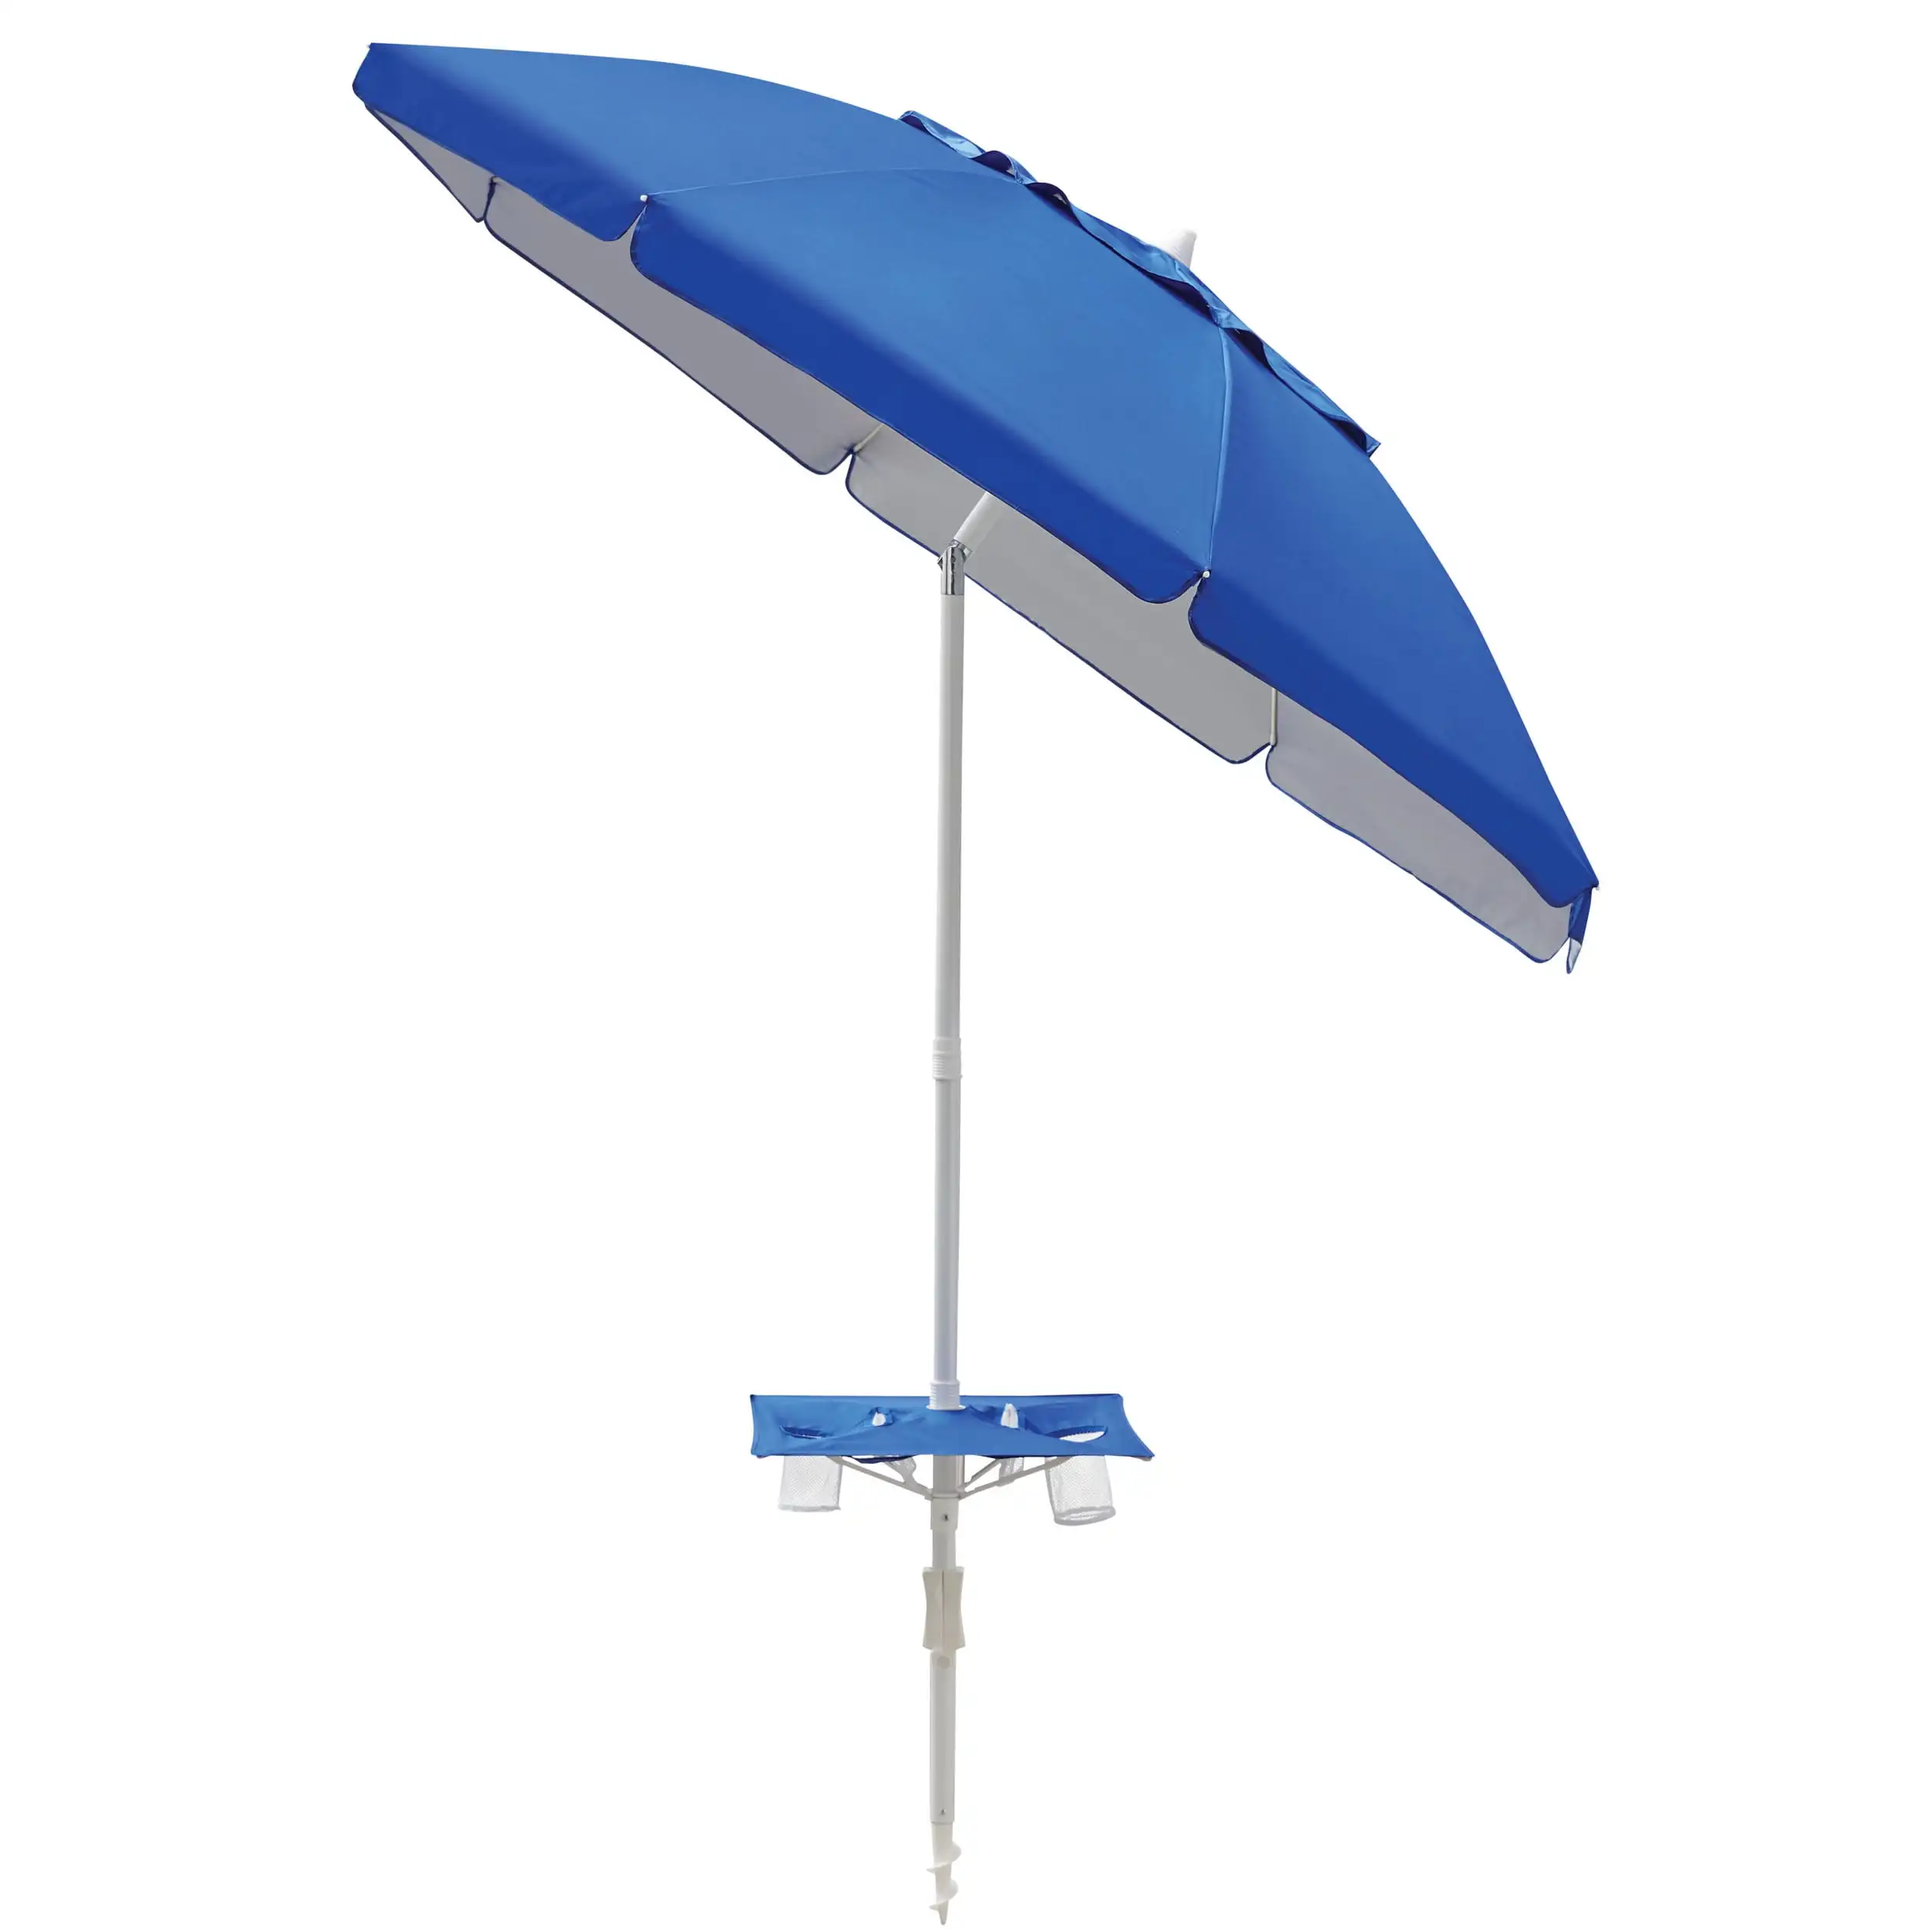 

Mainstays 7 Feet Vented Beach Umbrella with Table, w/Tilt and Built-in Sand Anchor, Blue